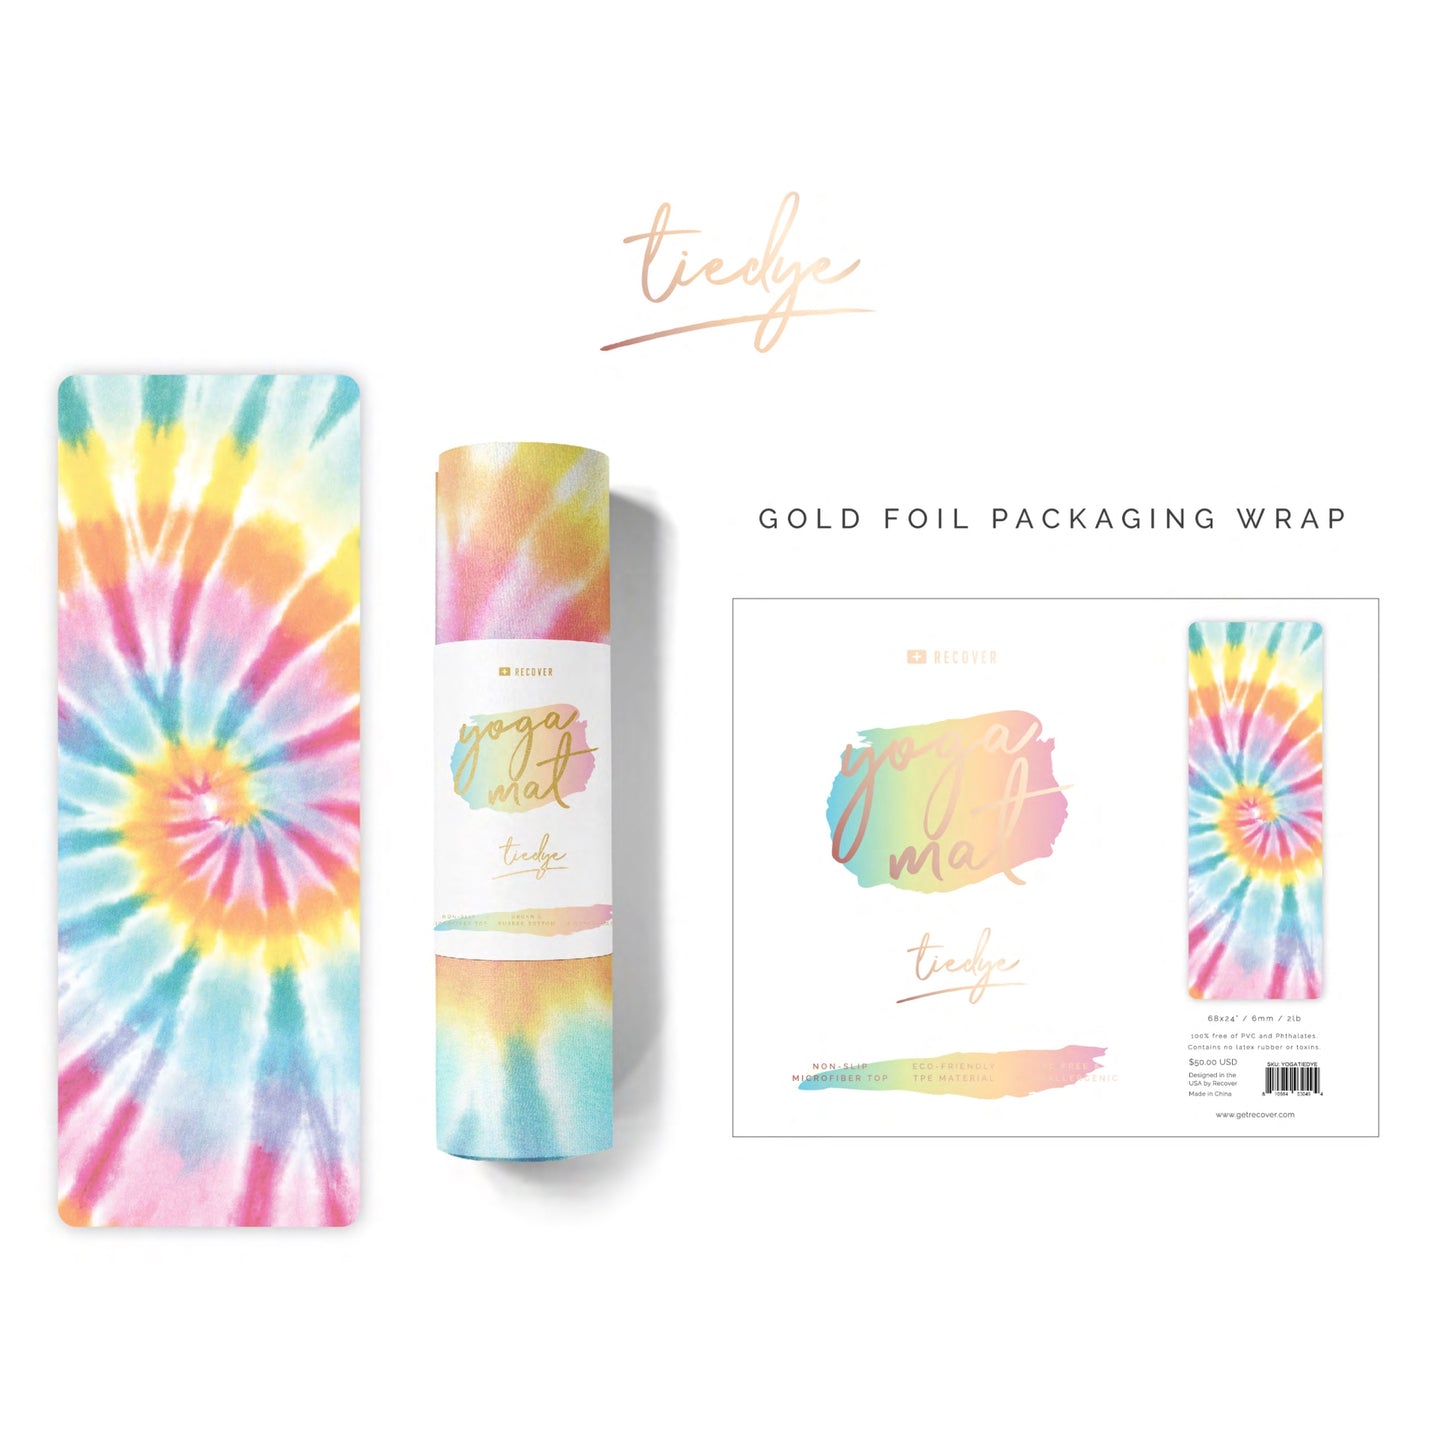 RECOVER LUXE YOGA MAT-TIE DYE